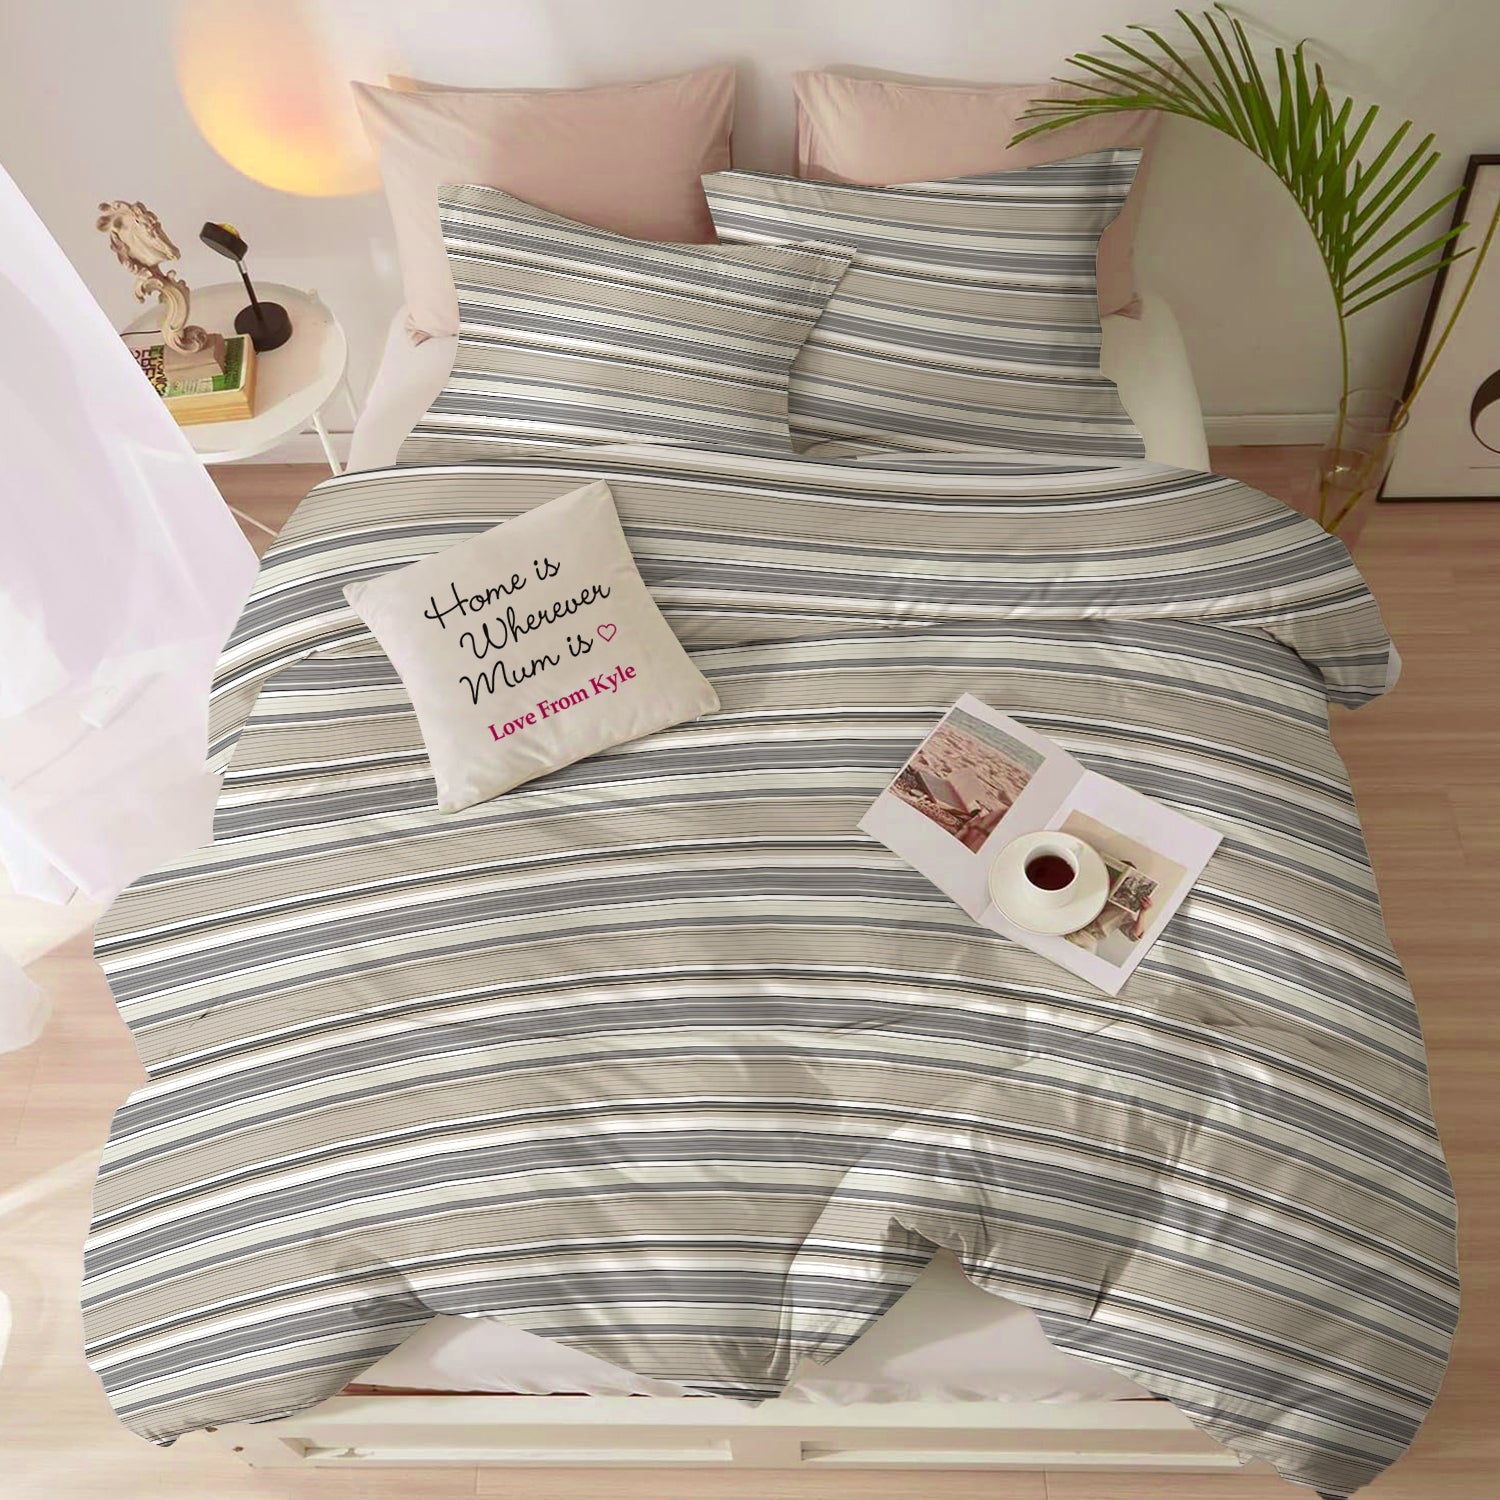 Duvet Cover 4 piece set Super King size High quality 240x260 duvet cover with Fitted sheet and pillow cases Fusion